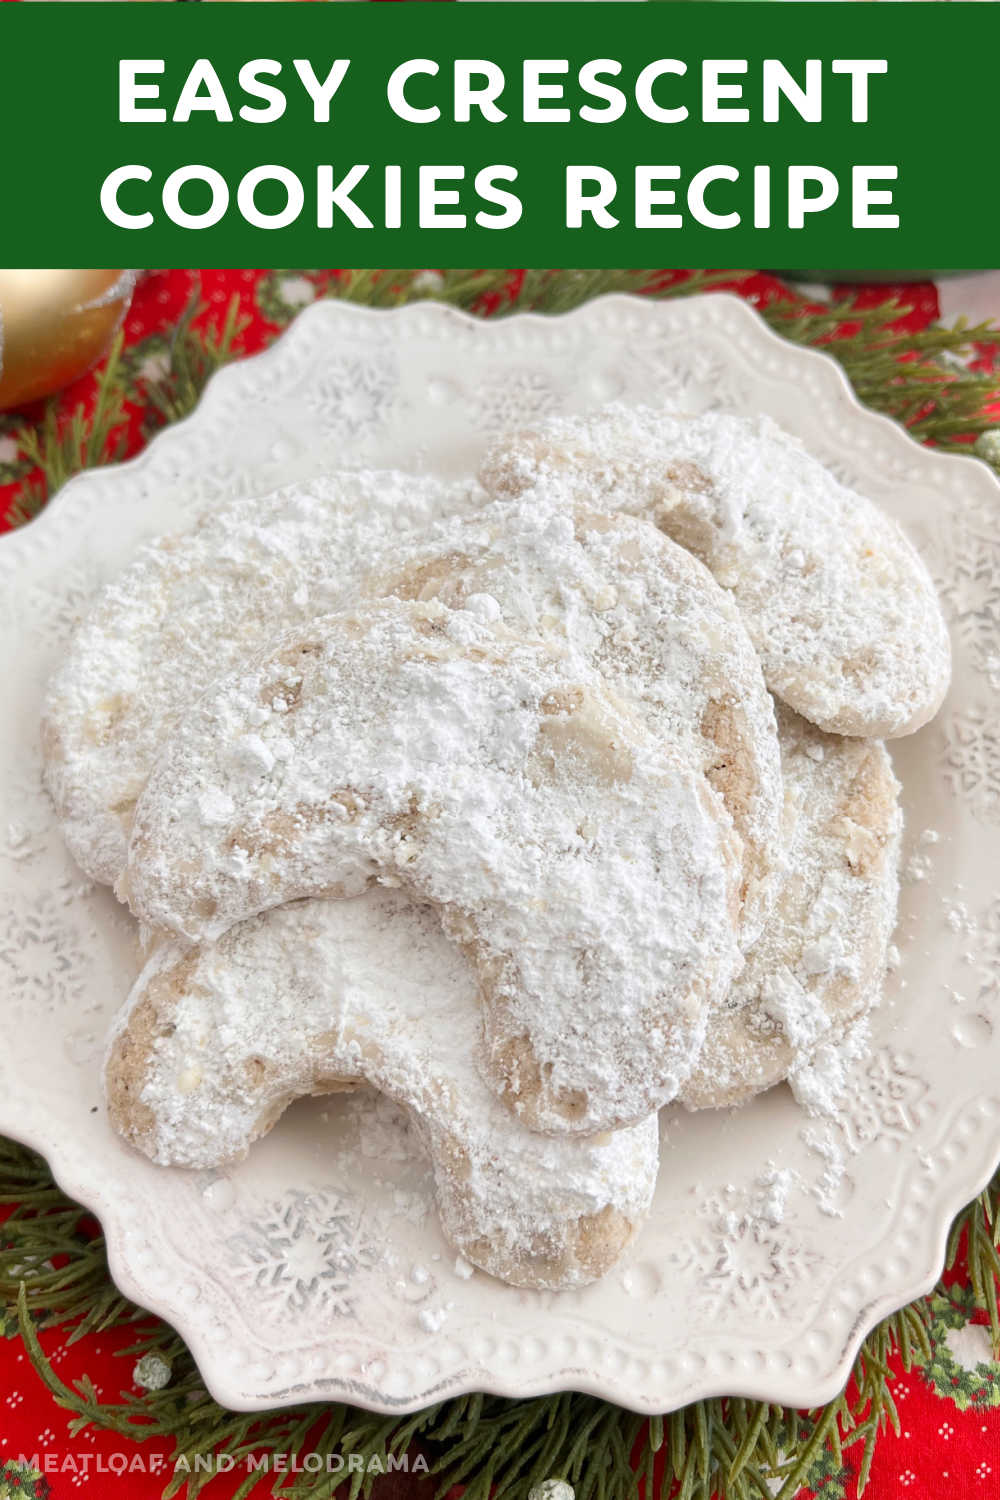 This Easy Crescent Cookies recipe with walnuts and powdered sugar makes delicious crescent shape Christmas cookies that melt in your mouth. Enjoy these traditional cookies throughout the holiday season! via @meamel